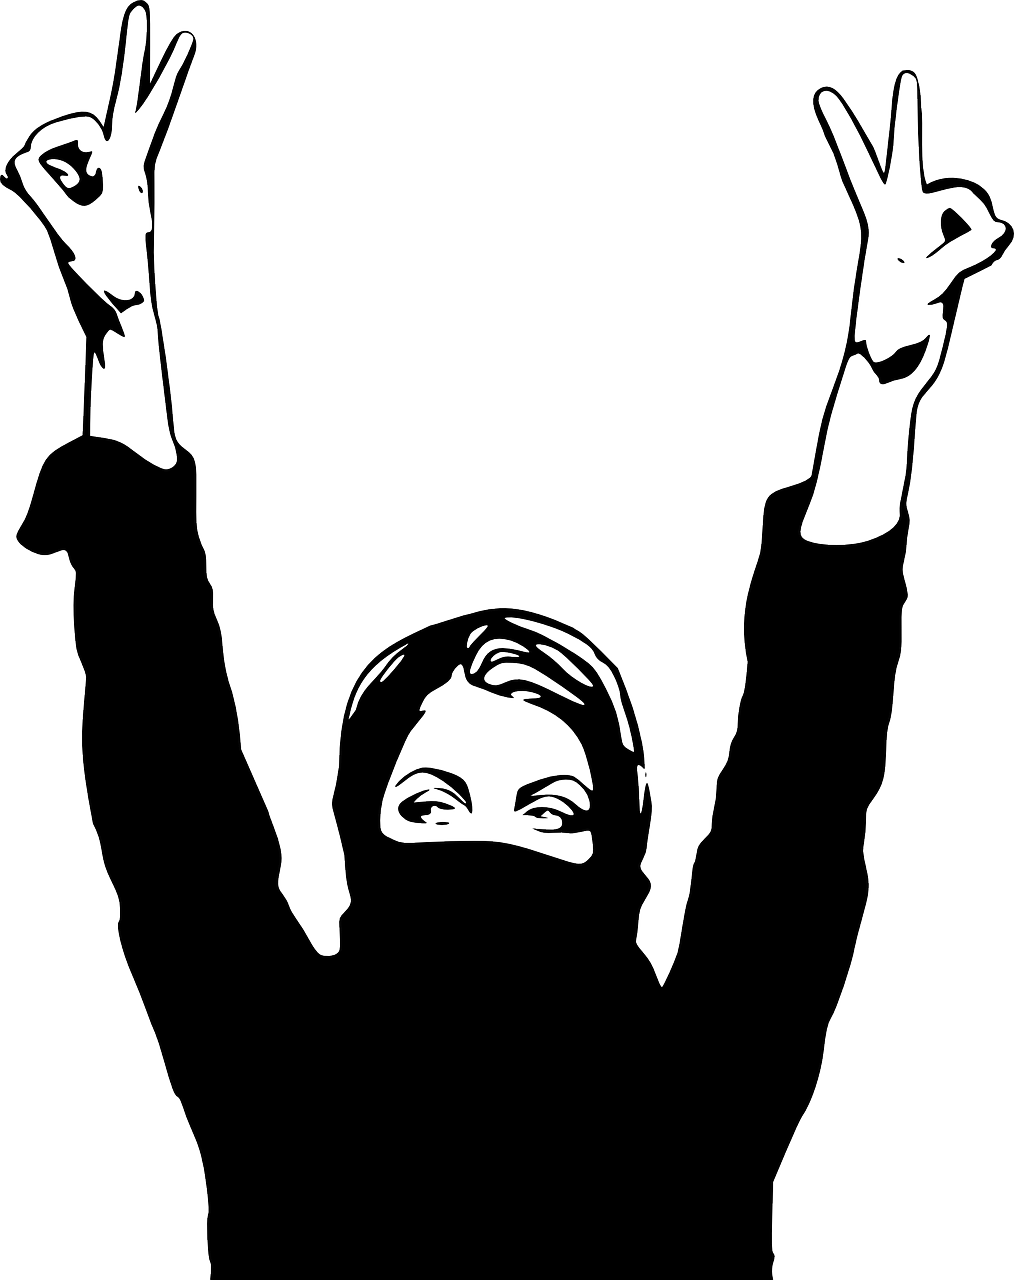 A Silhouette Of A Person With Their Hands Up